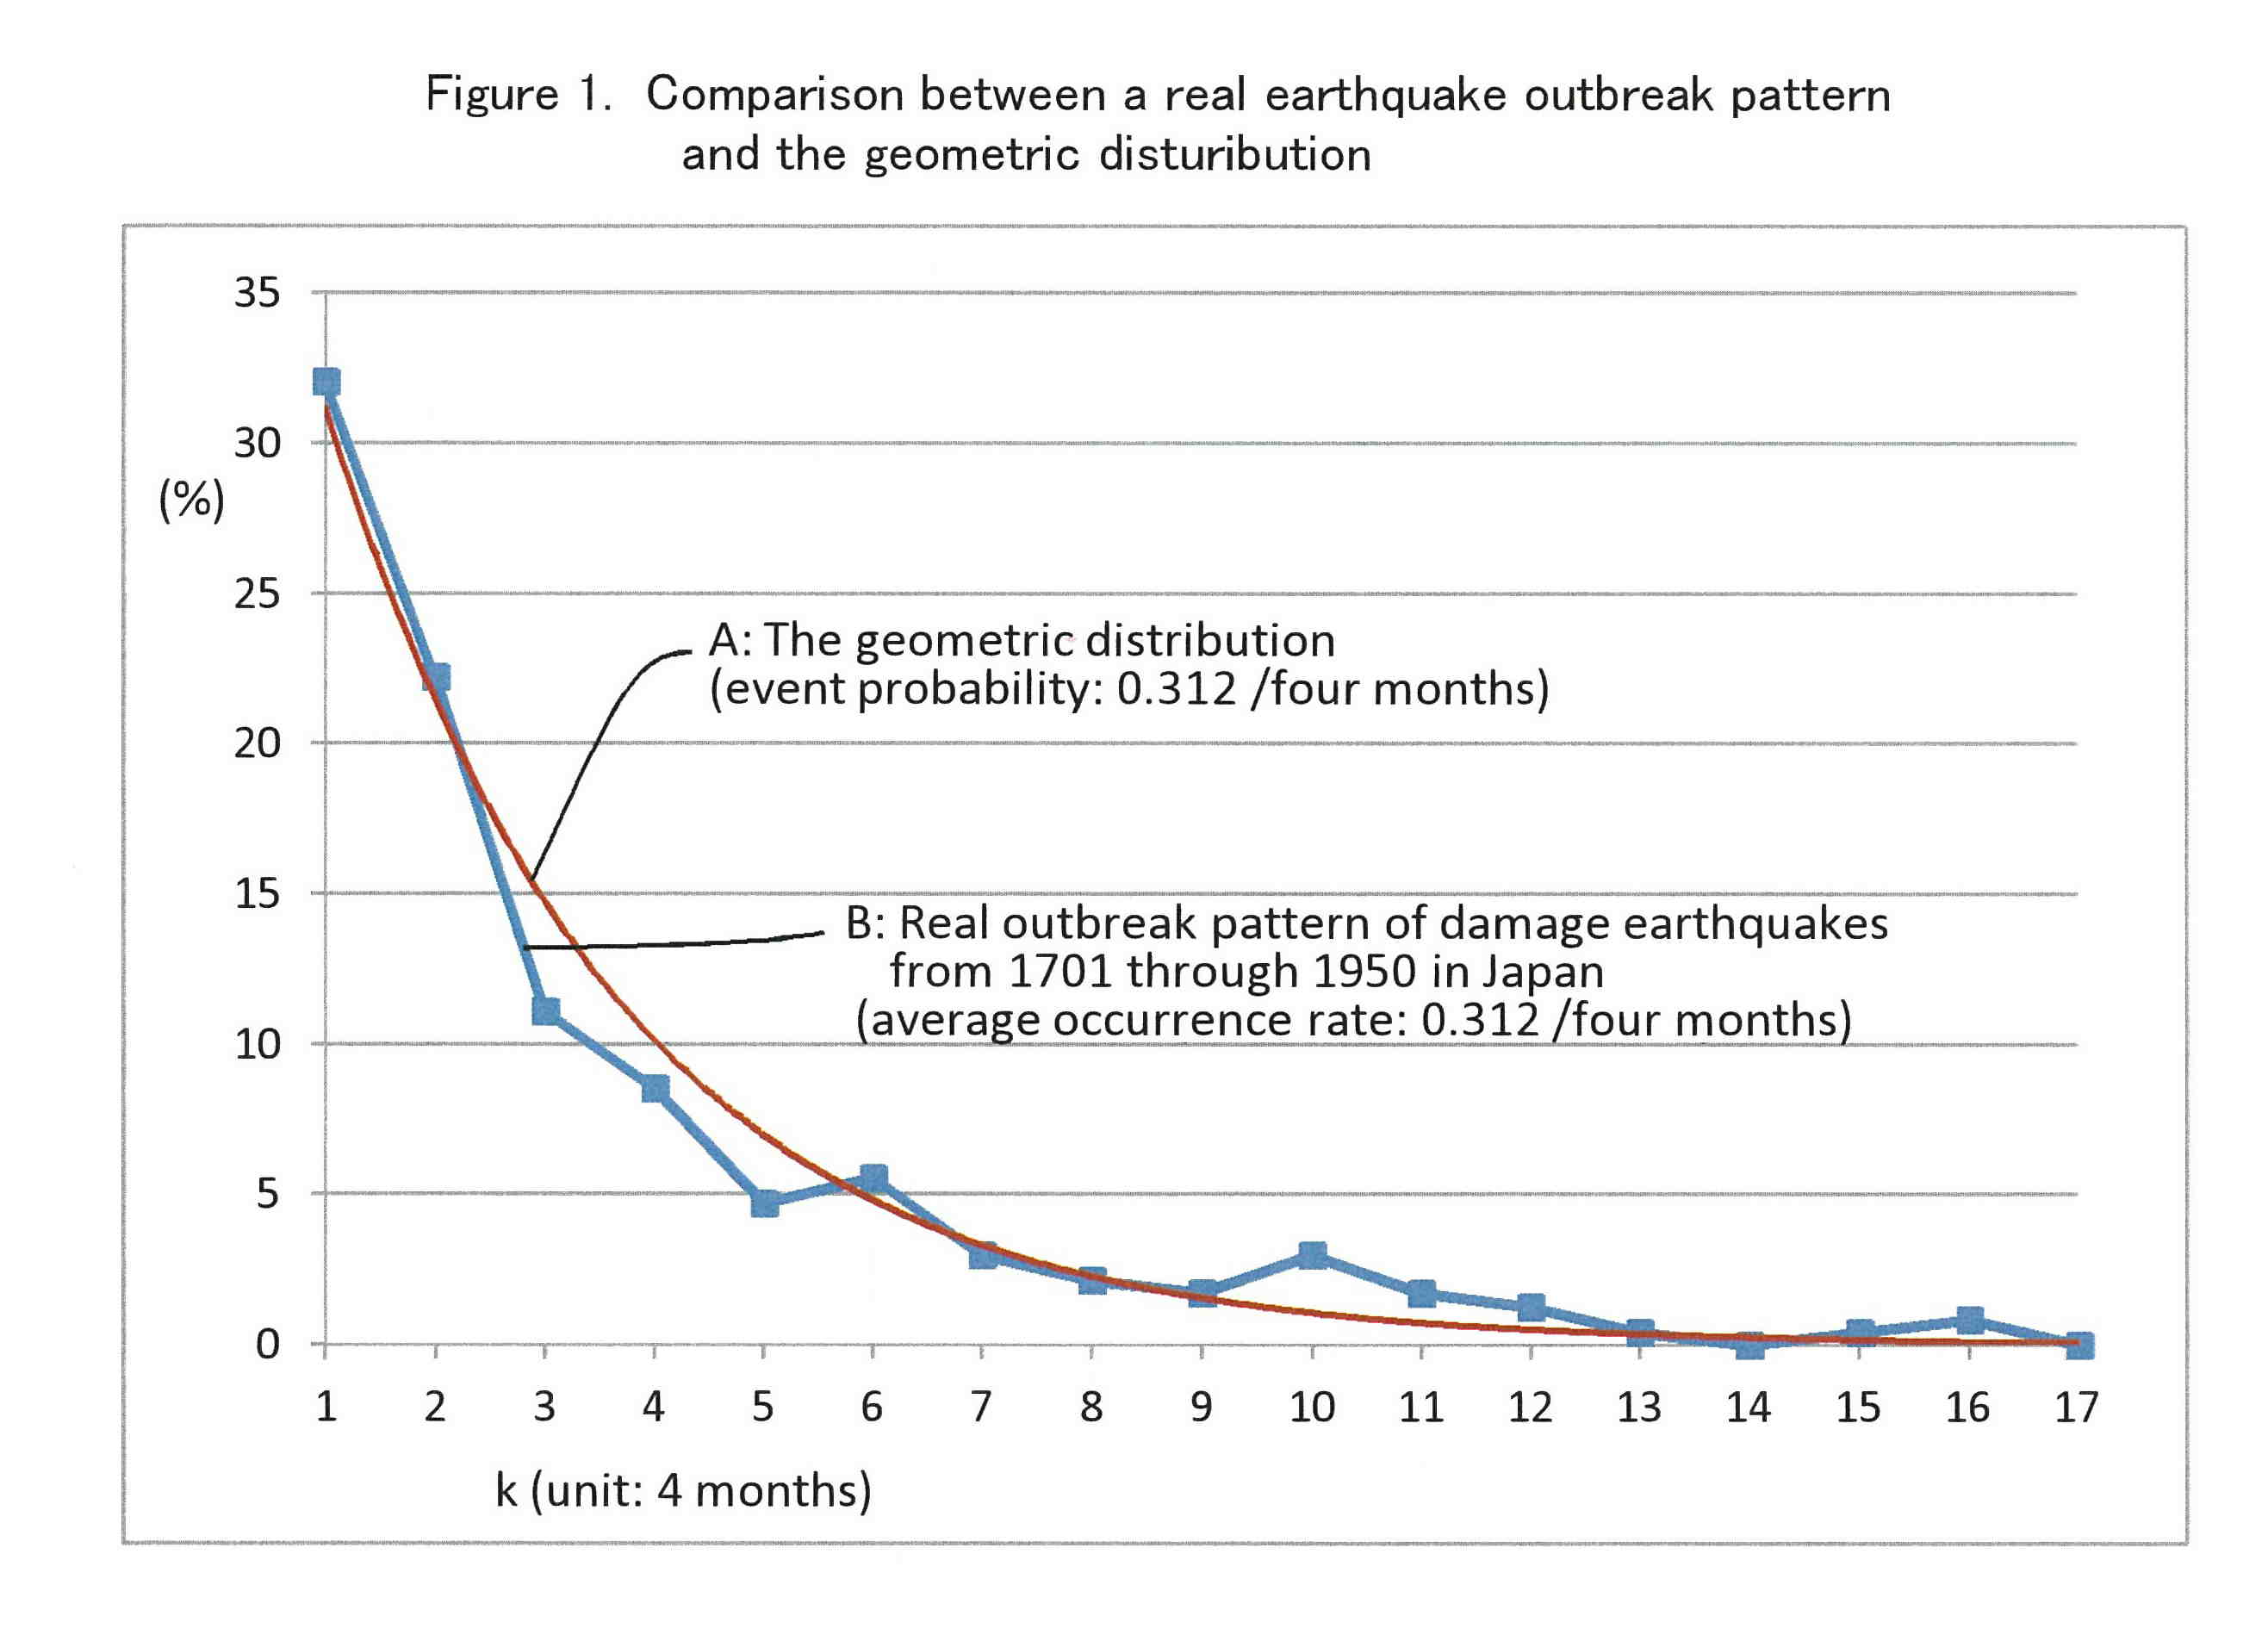 Comparison between real earthquake pattern and geometric distribution